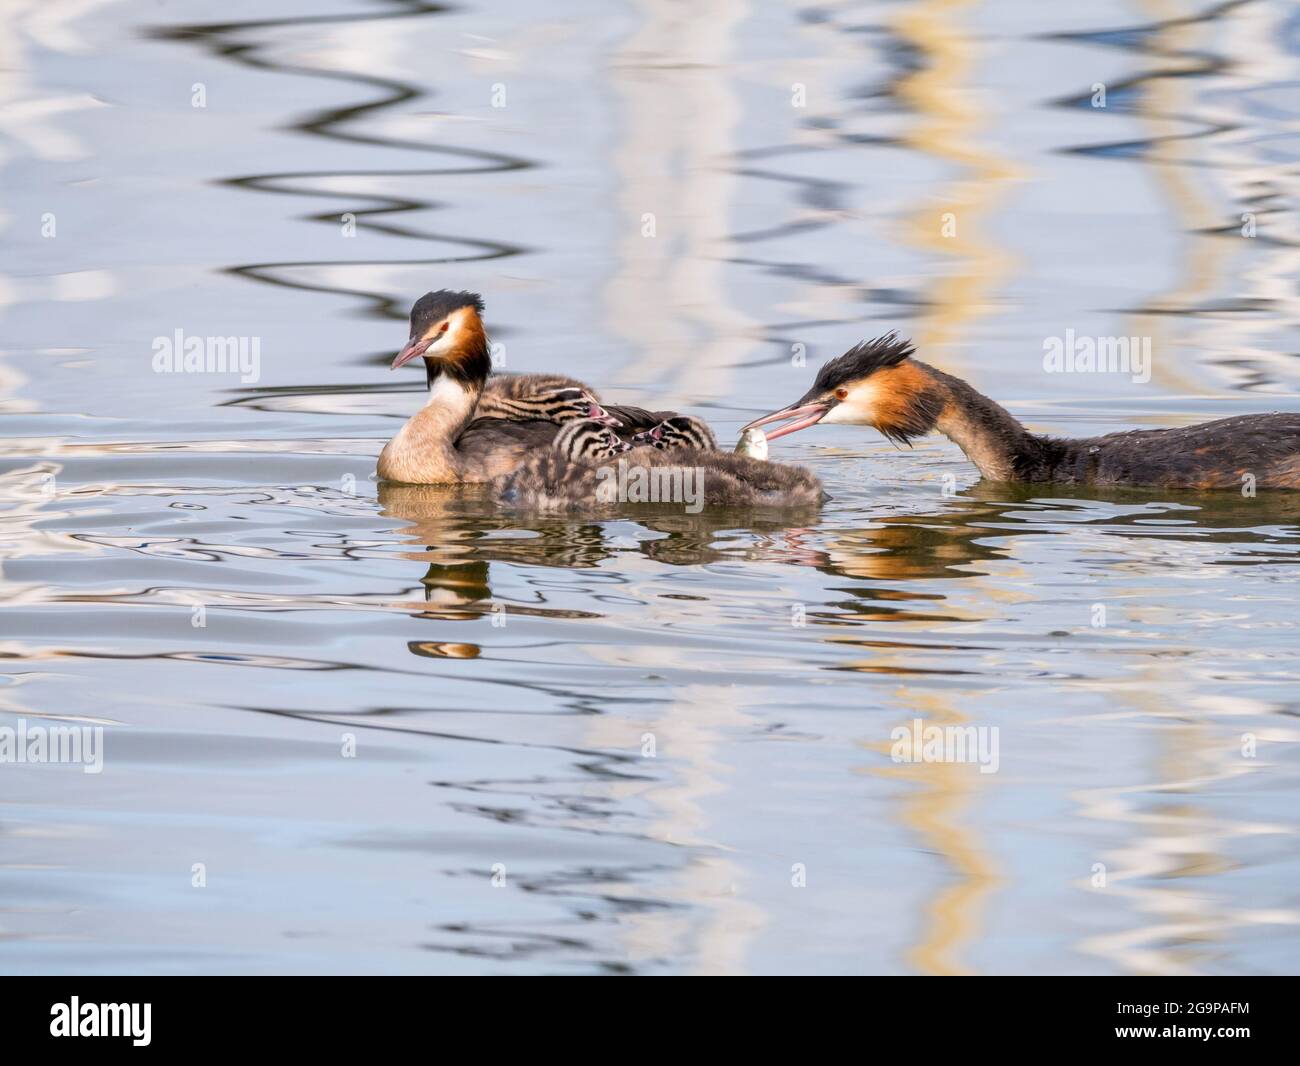 Great crested grebe, Podiceps cristatus, family - father feeding fish to young chick, Netherlands Stock Photo